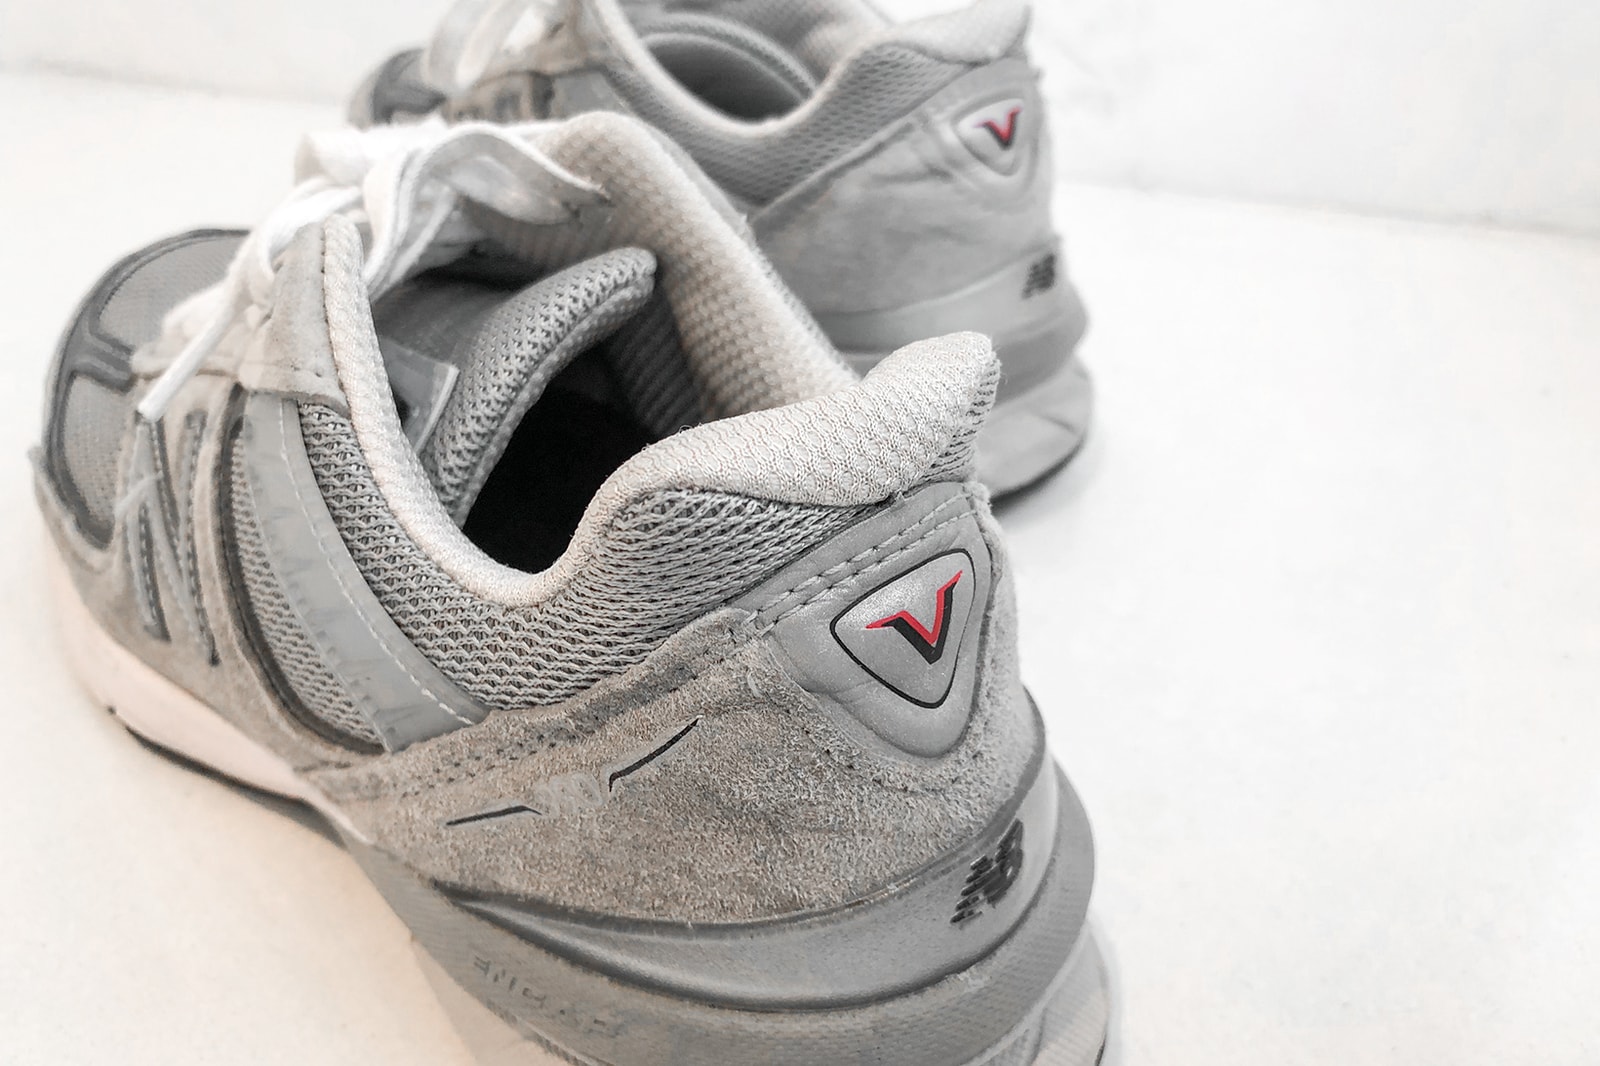 axe Ruthless Tickling New Balance 990v5 "Grey" Women's Sneakers Review | Hypebae